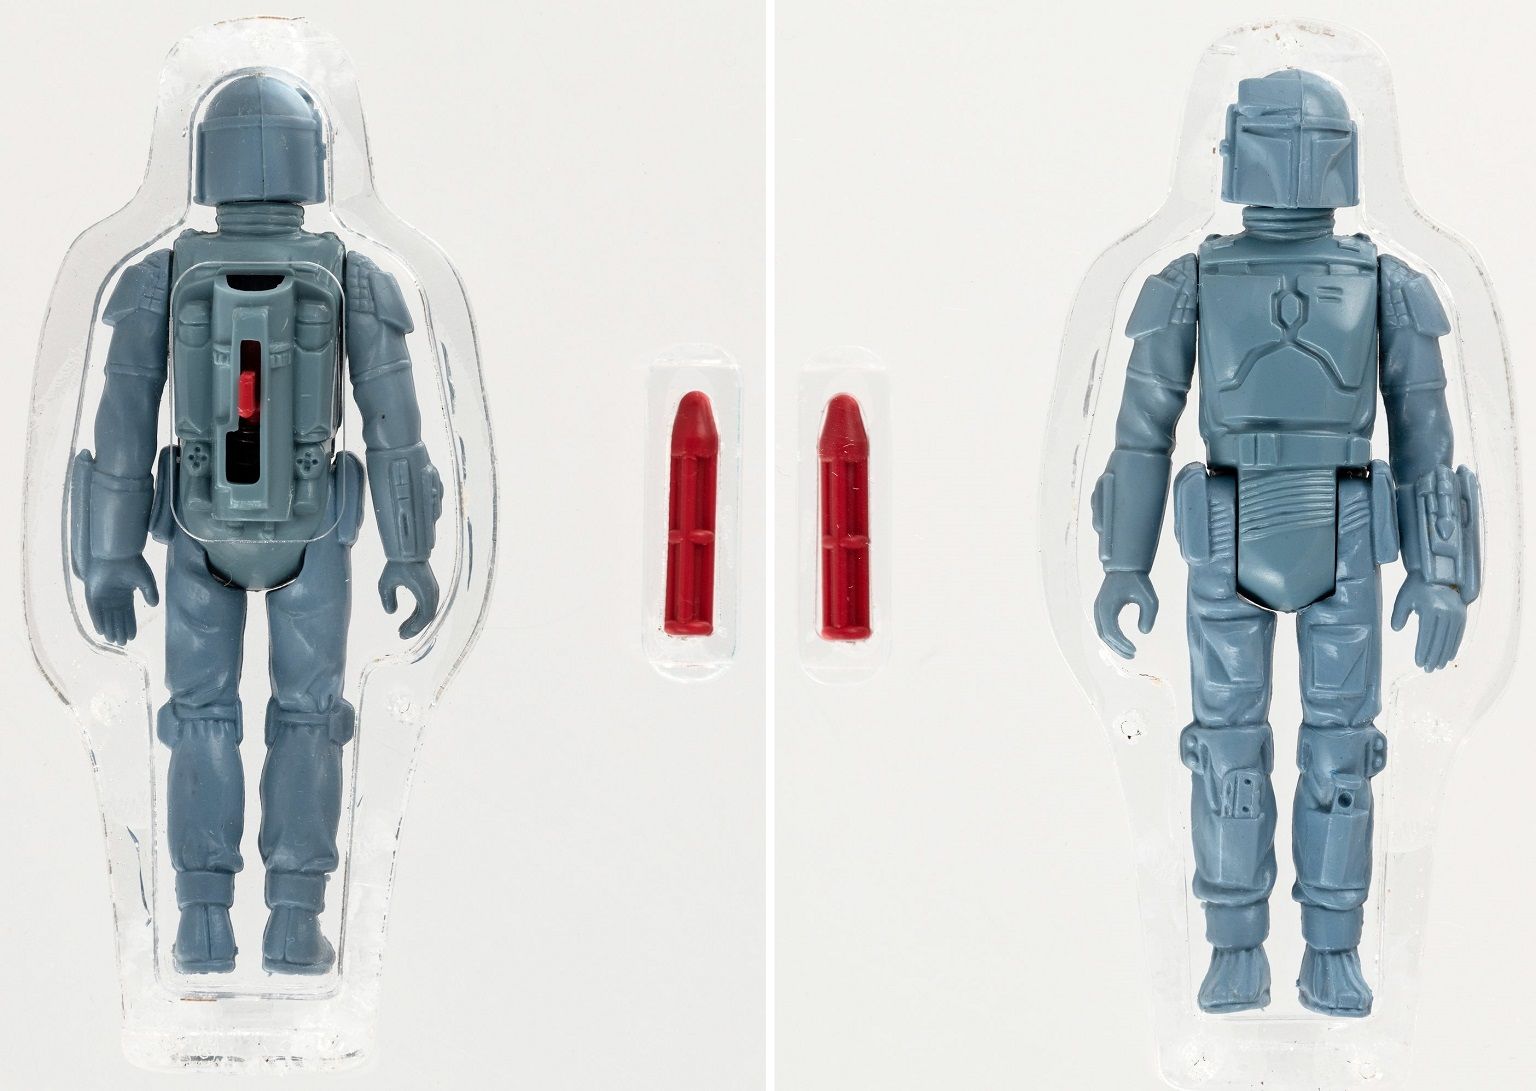 18 of the most valuable 'Star Wars' collectibles in the galaxy